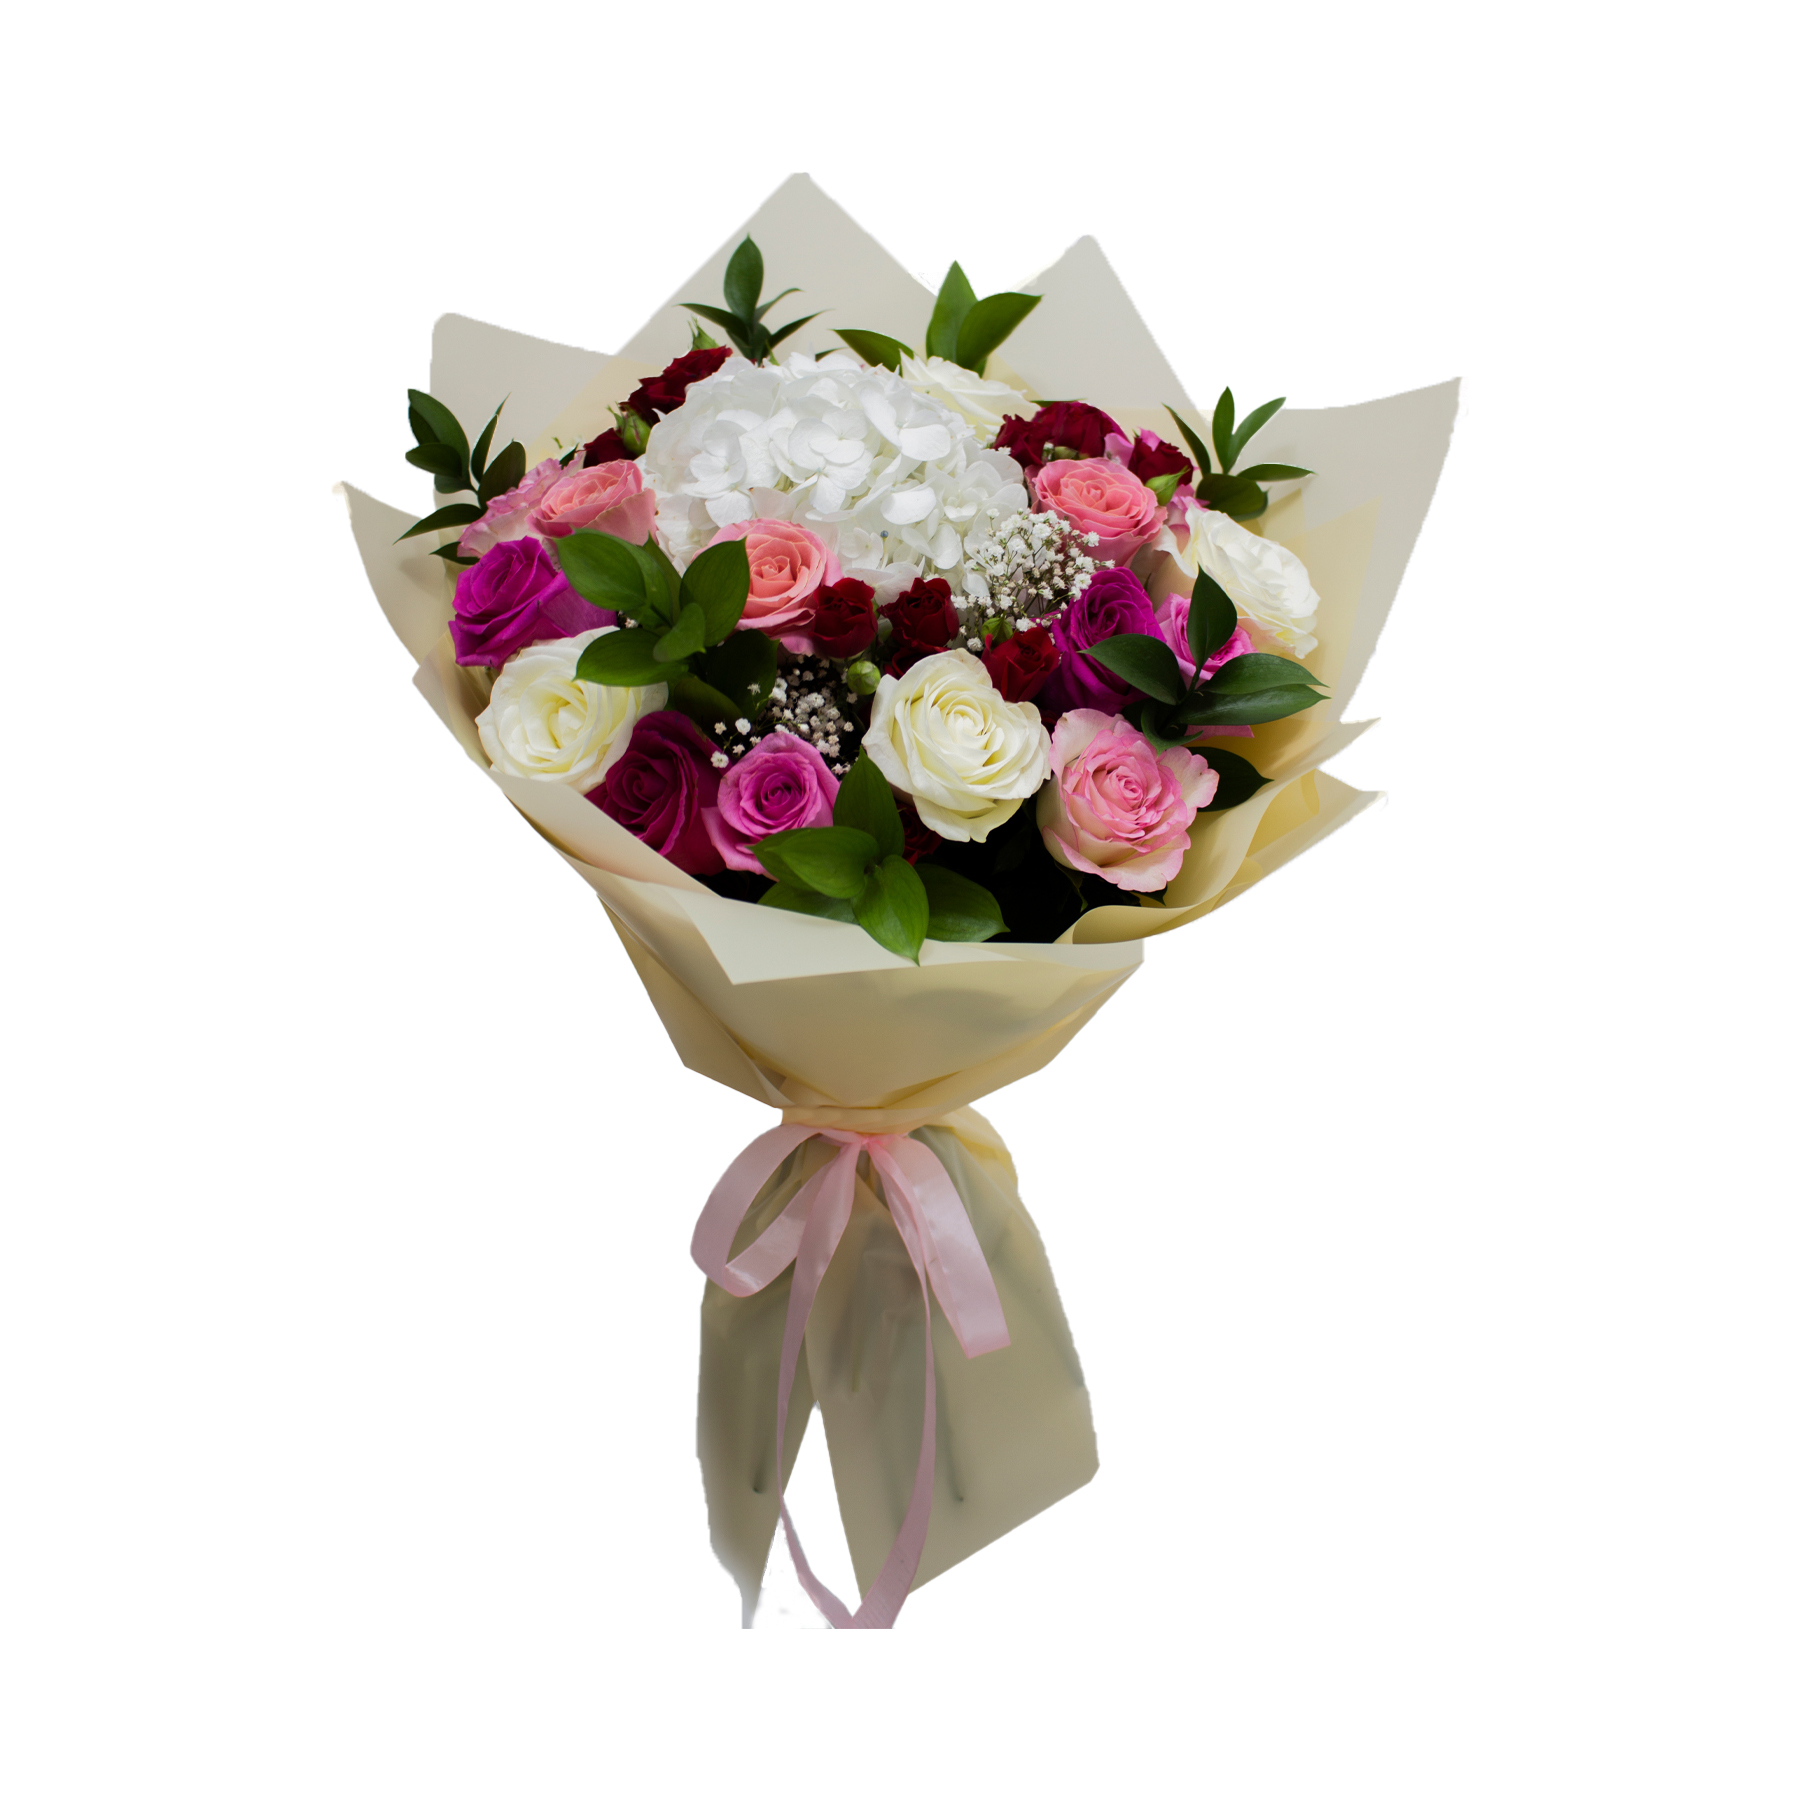 mix-pink-white-red-roses-with-hydrangea1